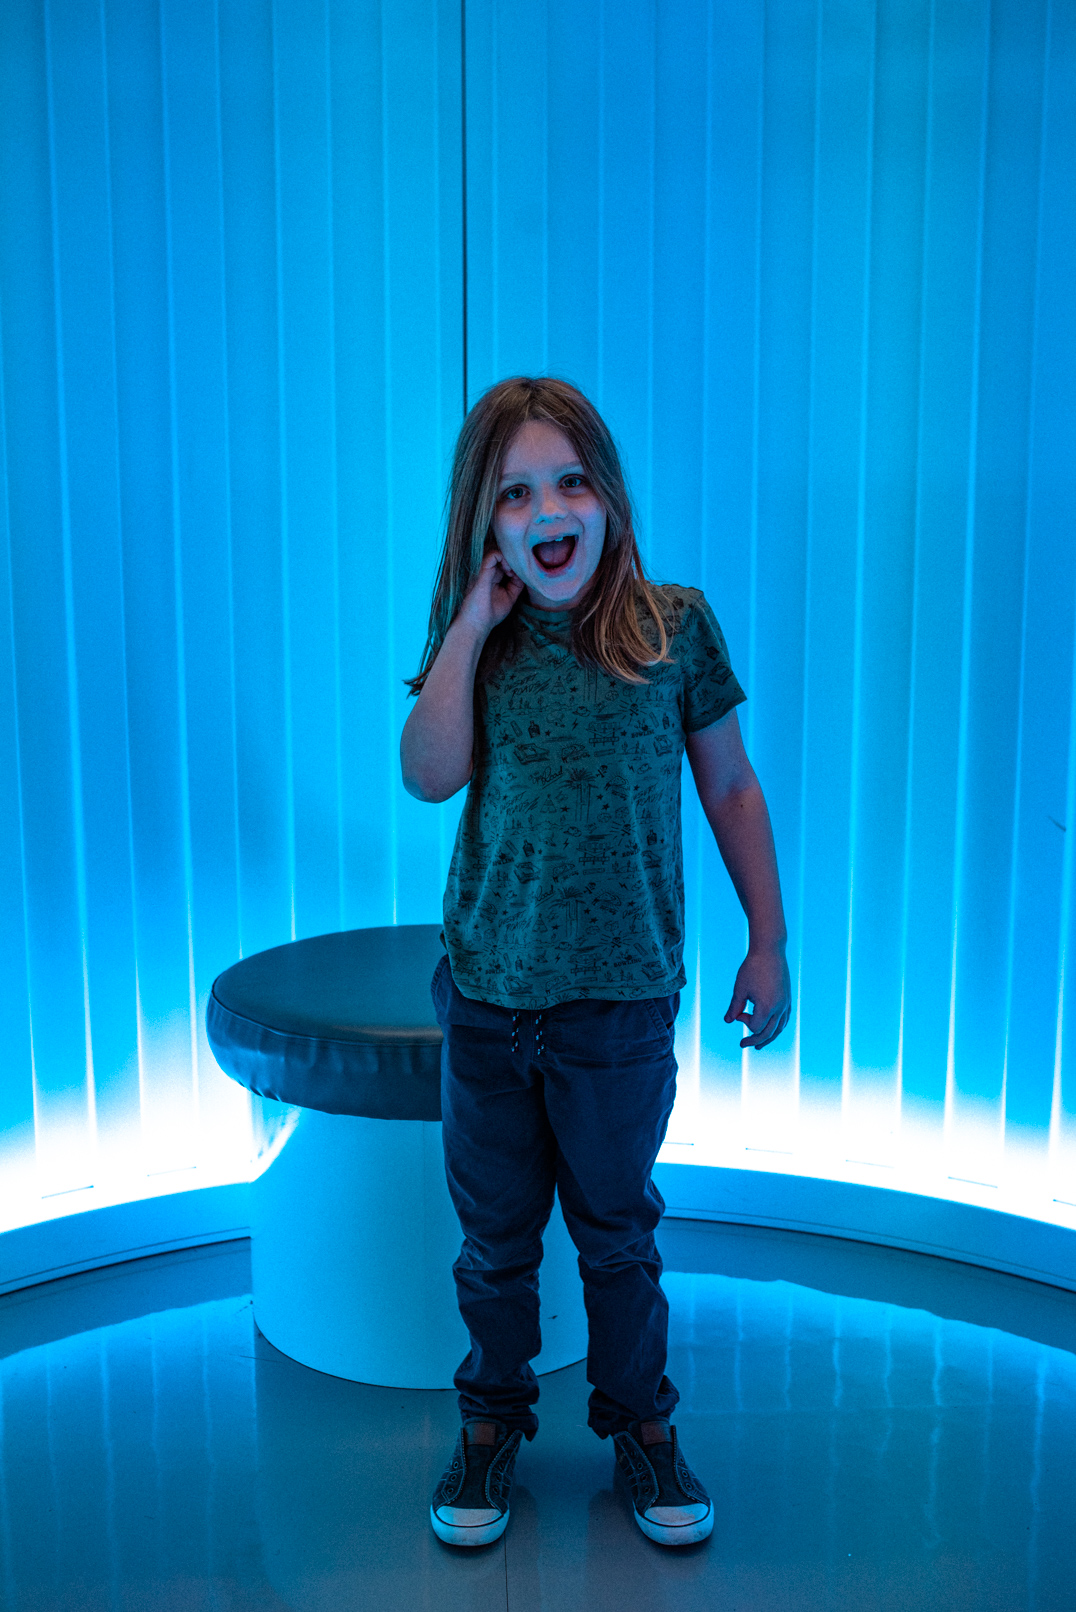 Intu Light house Experience - Charlie in the Calm House enveloped by blue light